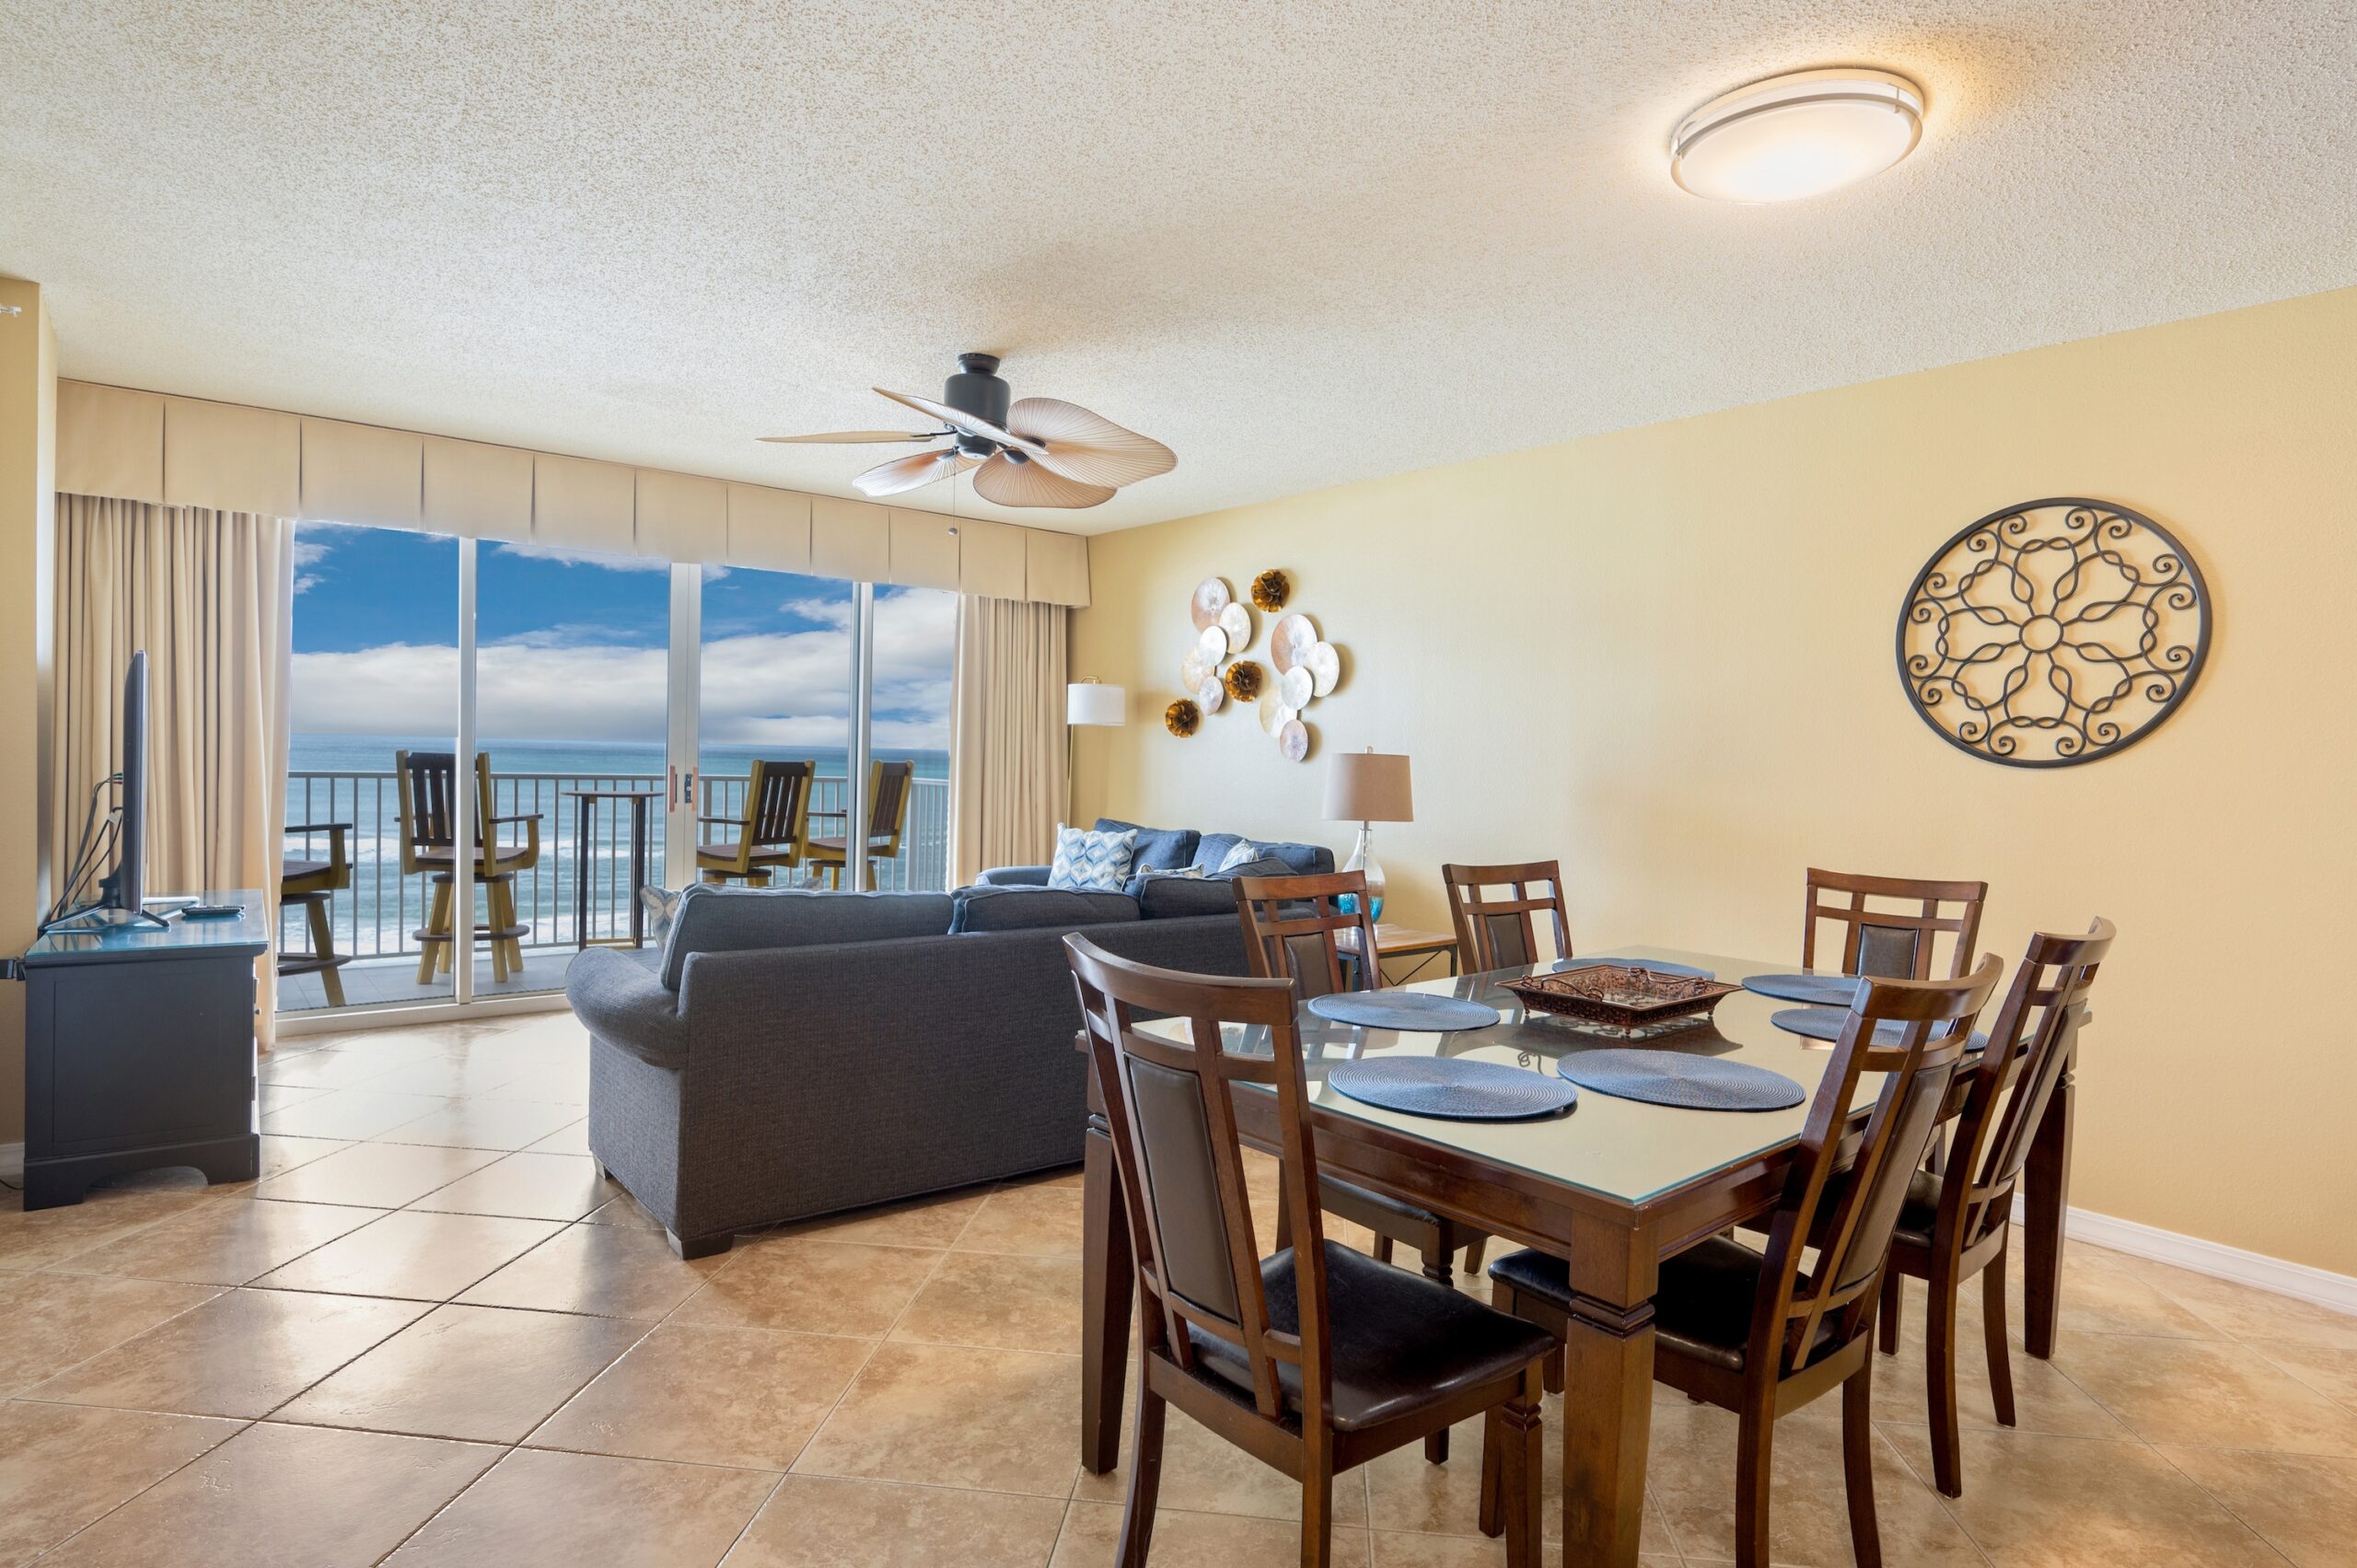 Dining area seats up to 9 people in our vacation beach rental